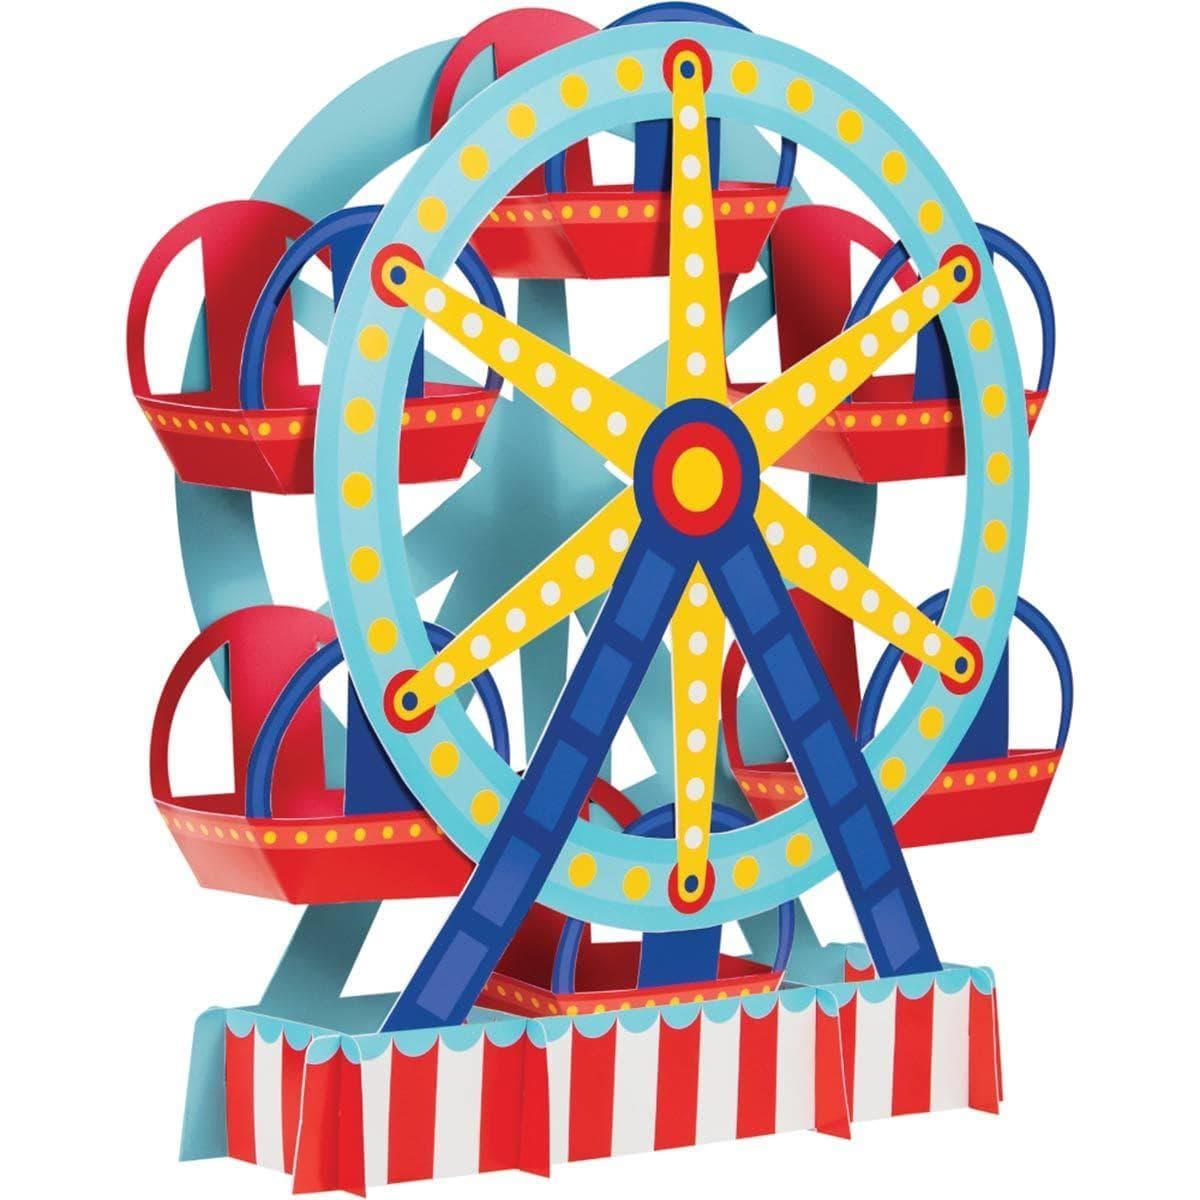 Buy Kids Birthday Carnival Centerpiece sold at Party Expert